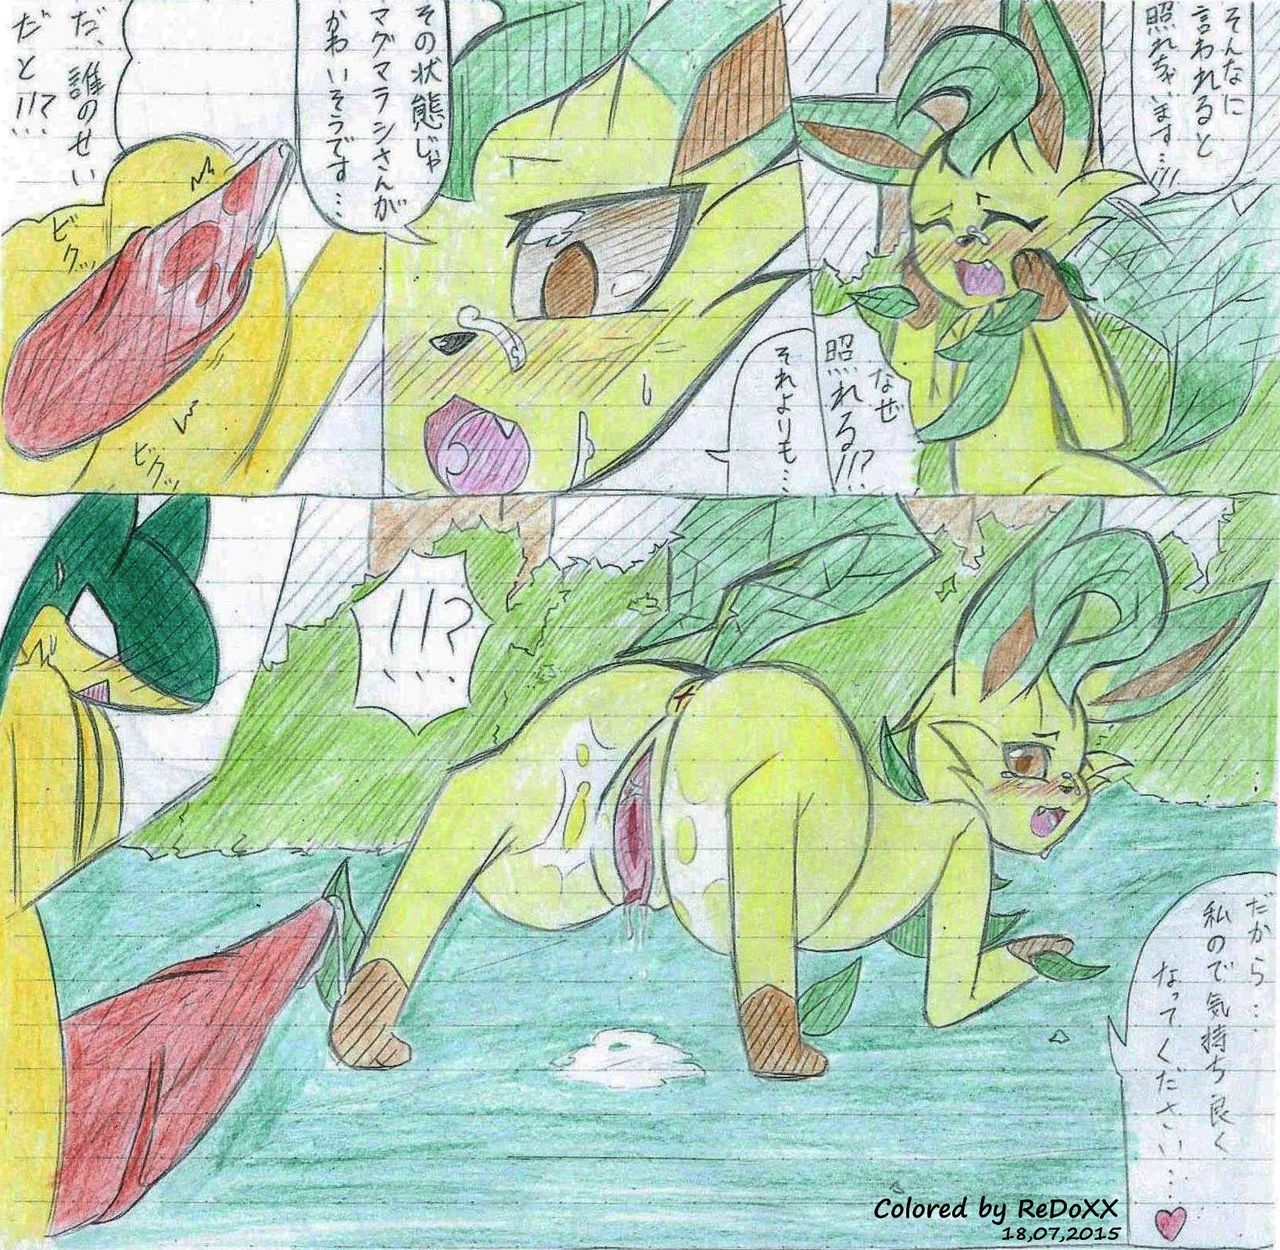 Leafeon X Quilava [Colorized by ReDoXX] 7